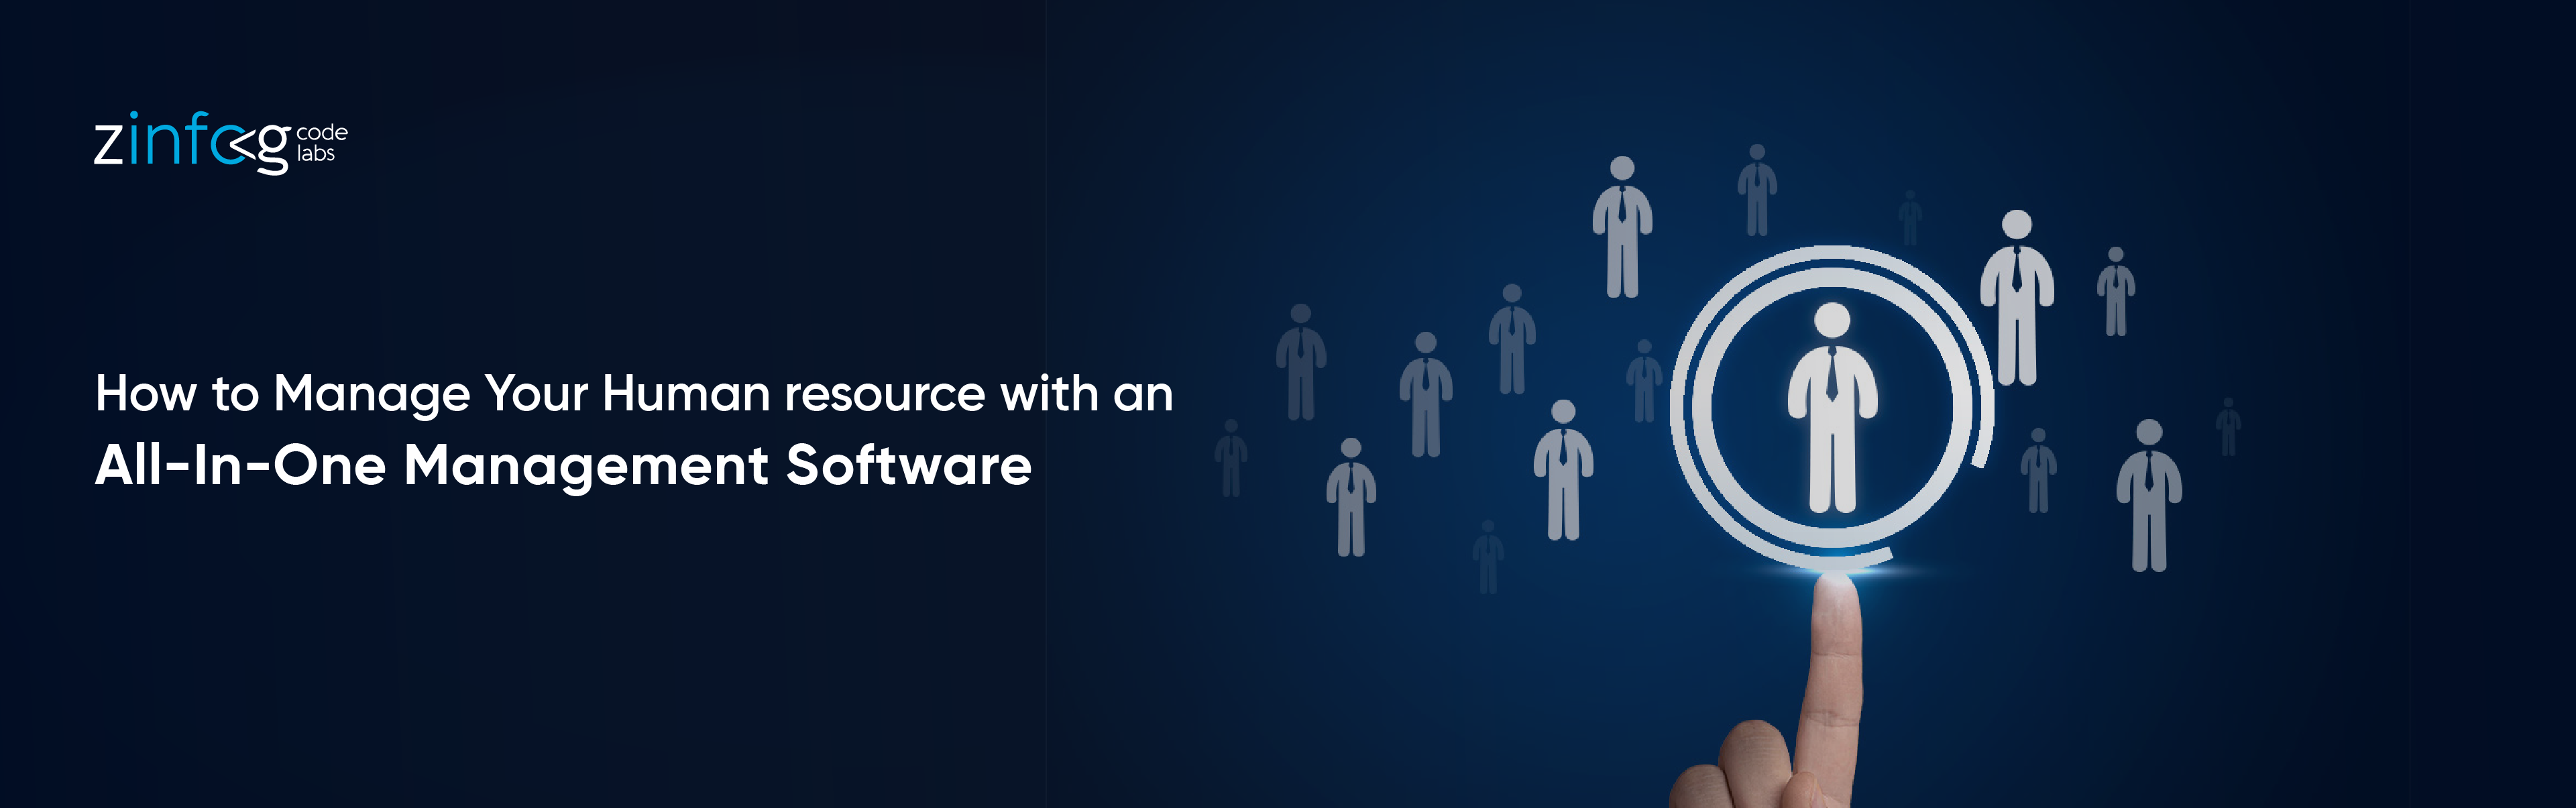 how-to-manage-your-human-resource-with-an-all-in-one-management-software.html